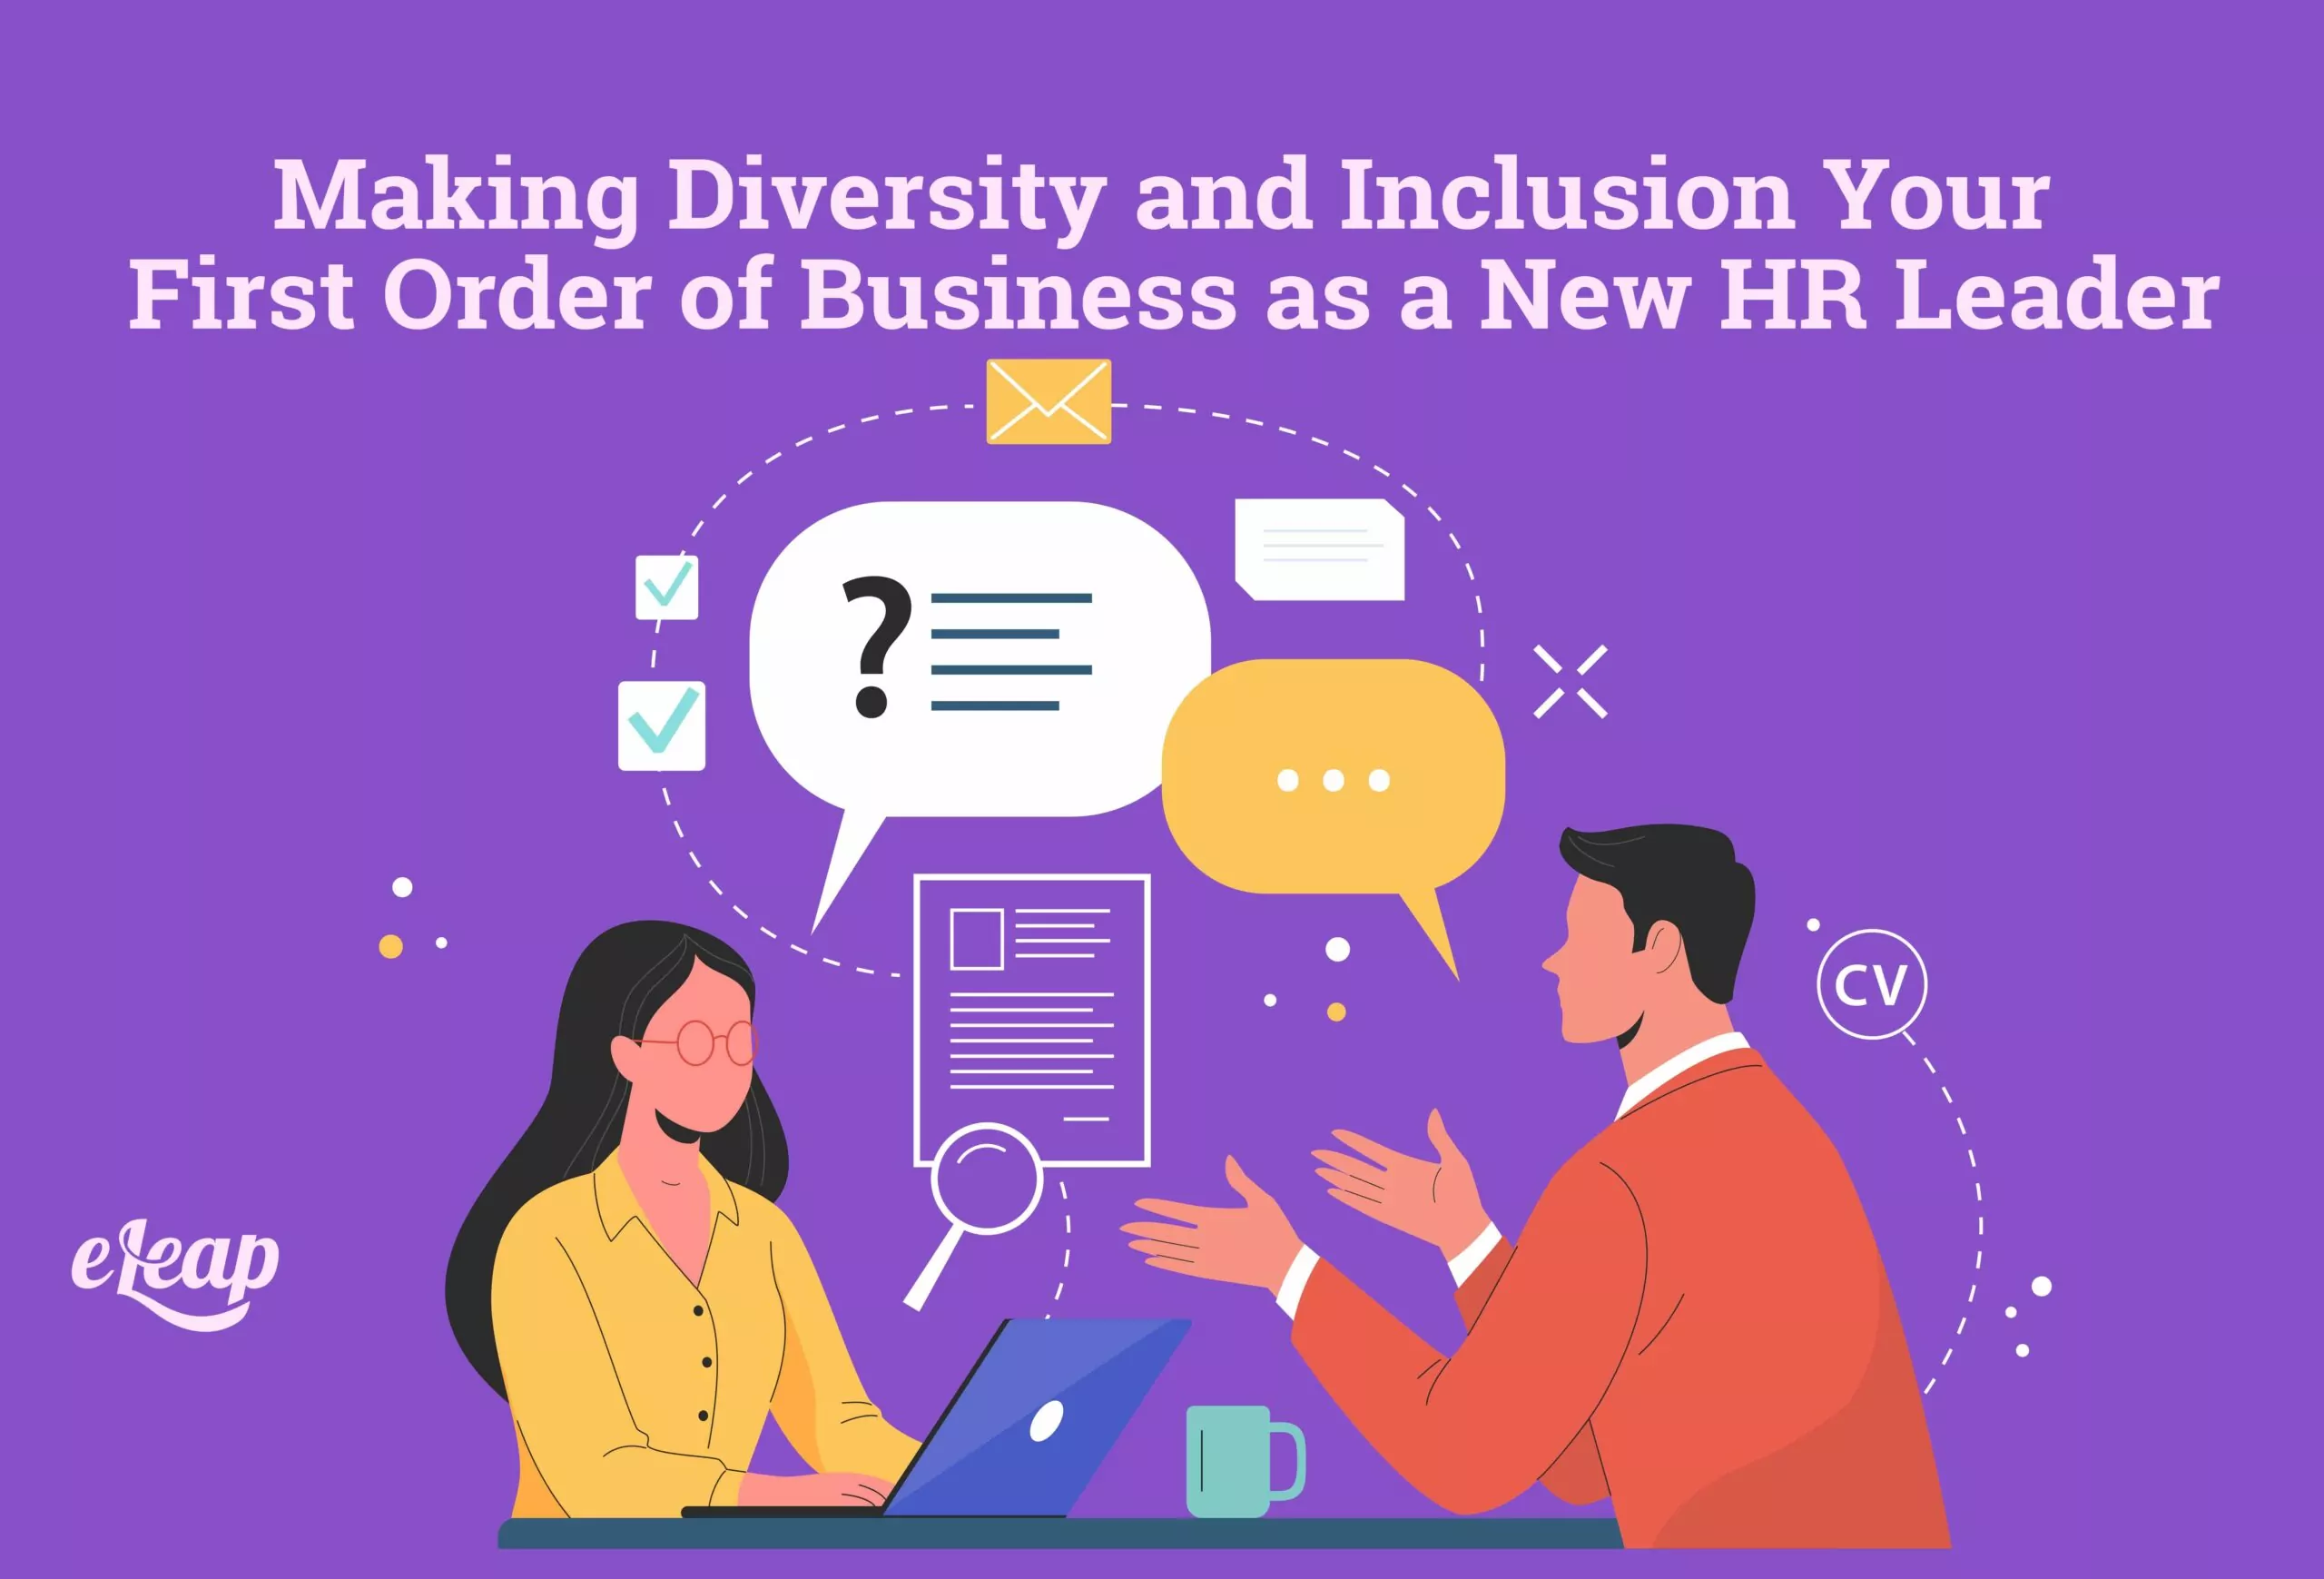 Making Diversity and Inclusion Your First Order of Business as a New HR Leader